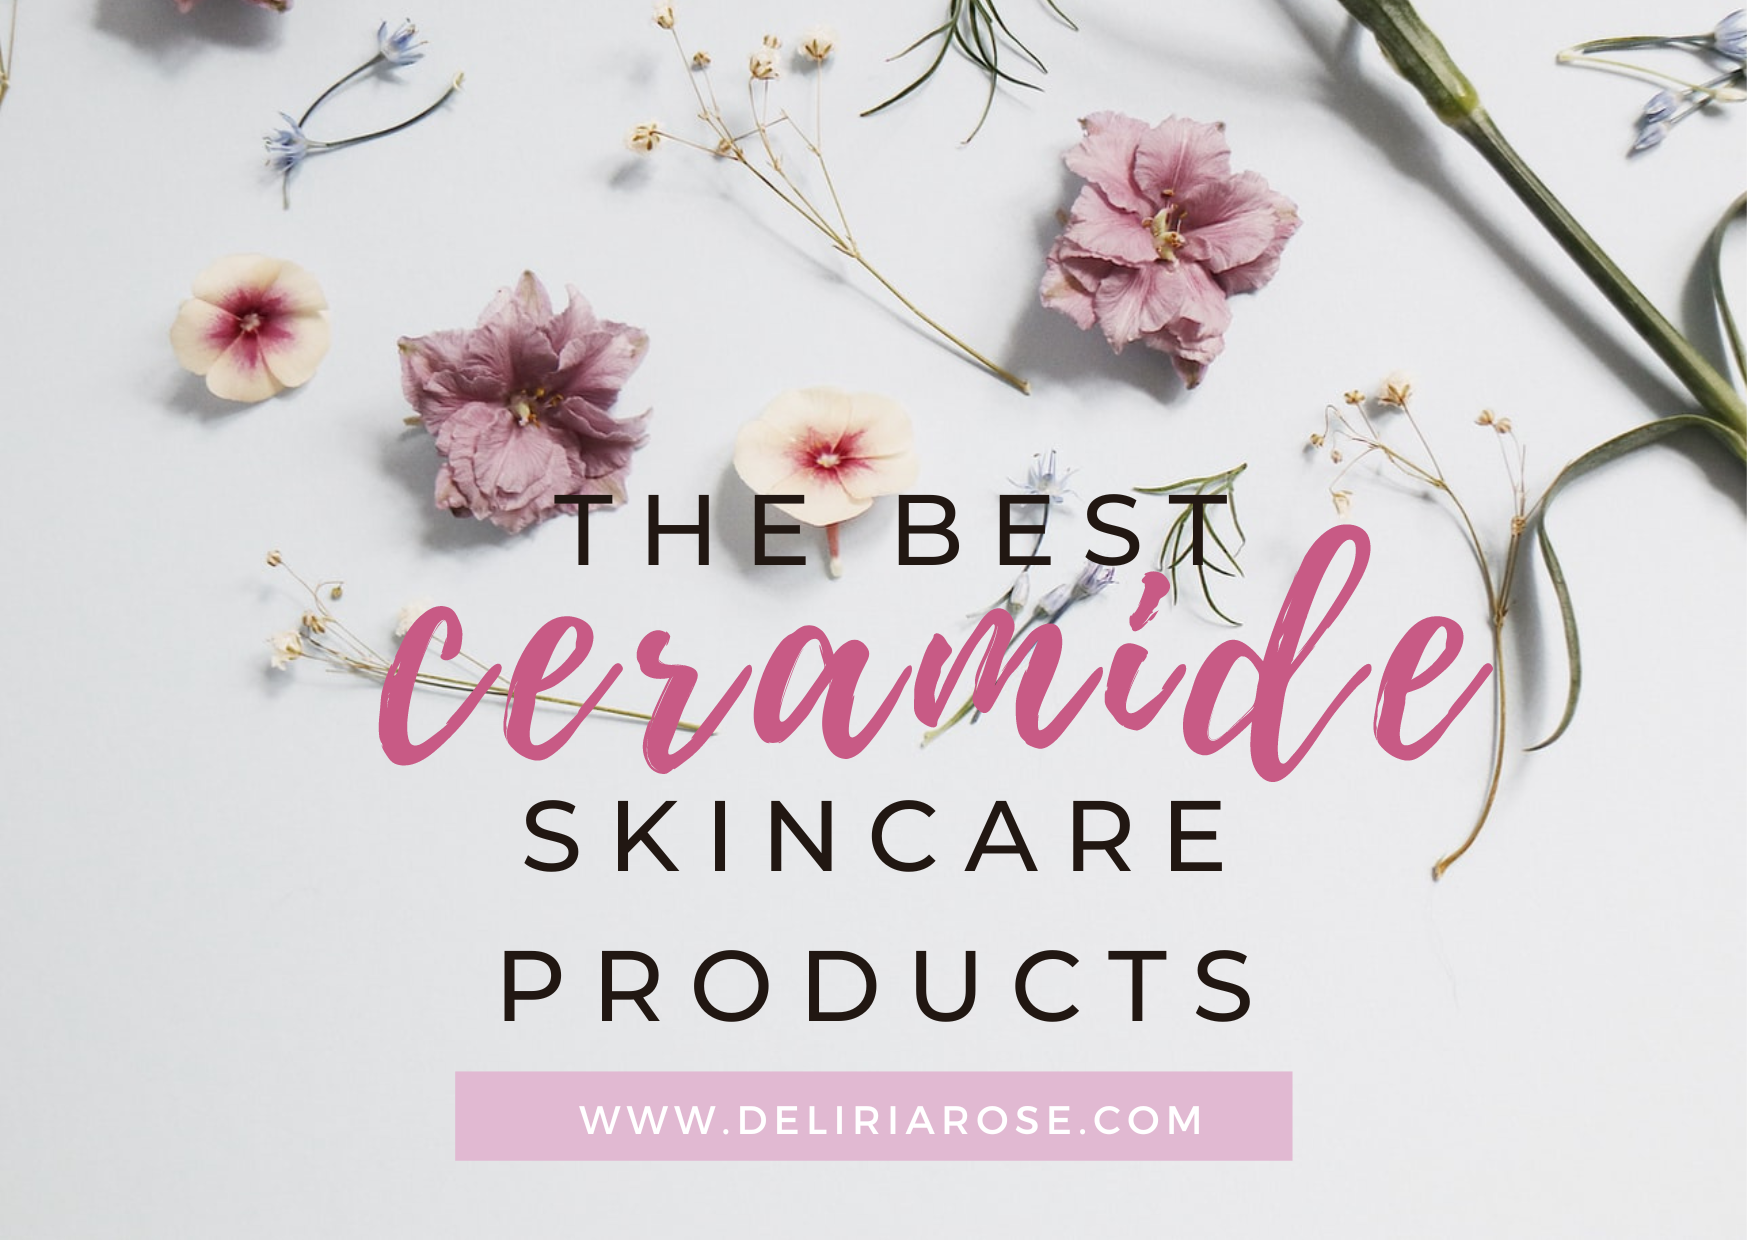 The Best Ceramide Skincare Products